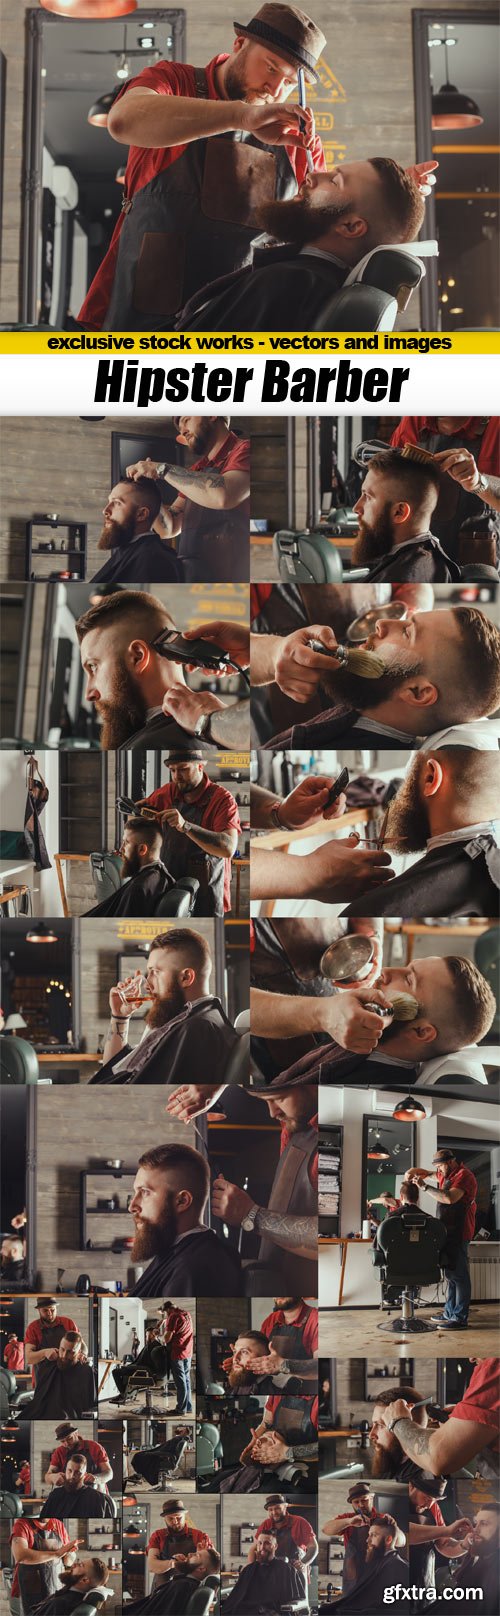 Hipster Barber - 15x JPEGs